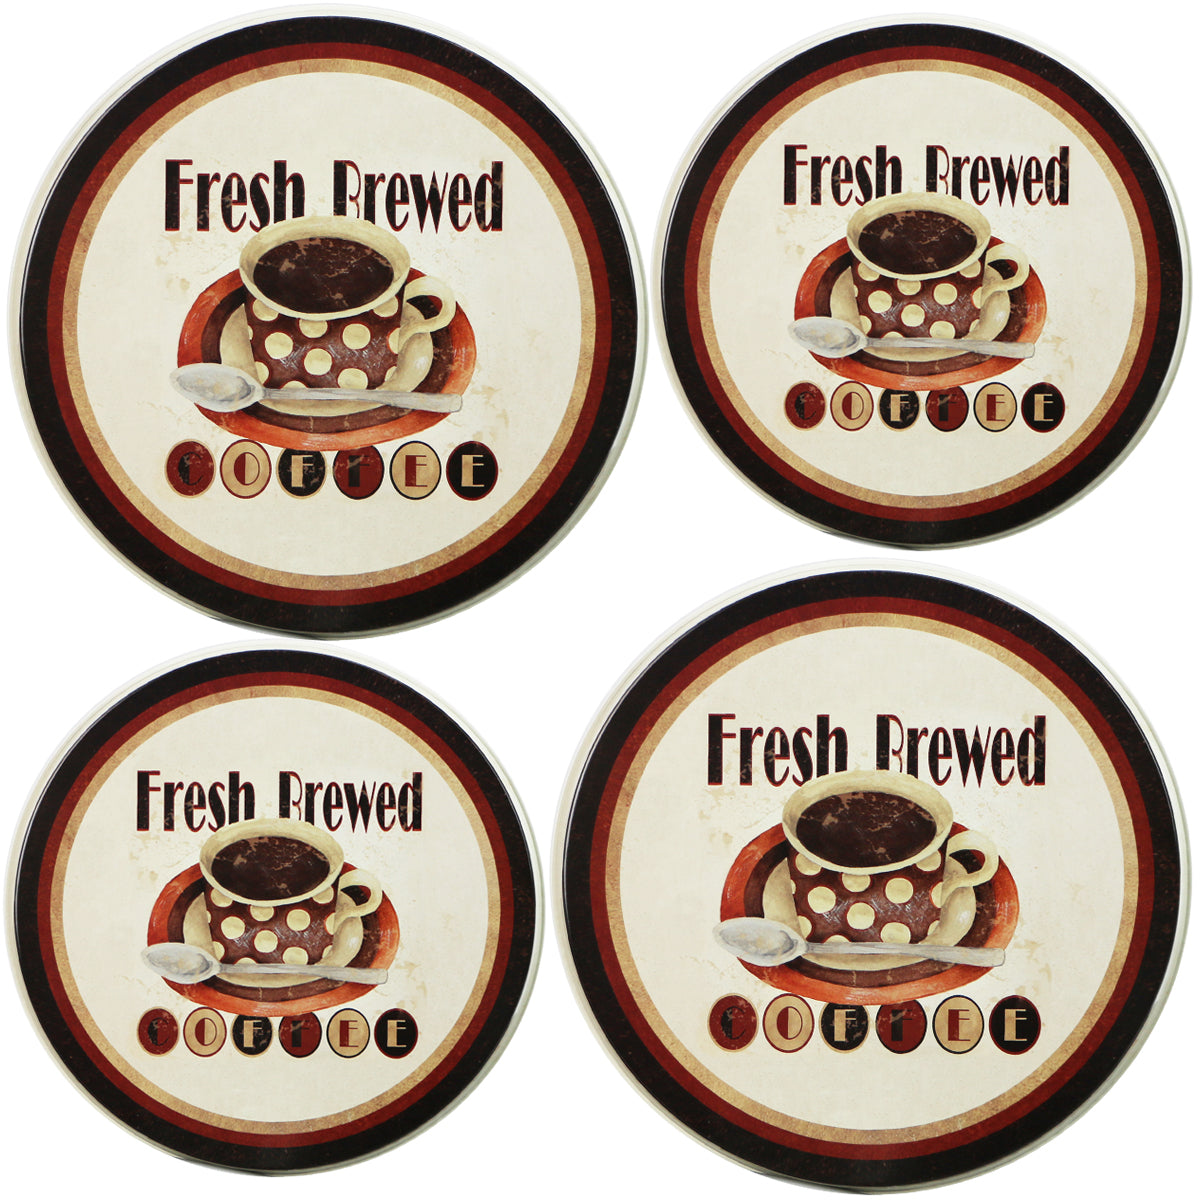 Reston Lloyd Electric Stove Burner Covers, Set of 4, A Perfect Day